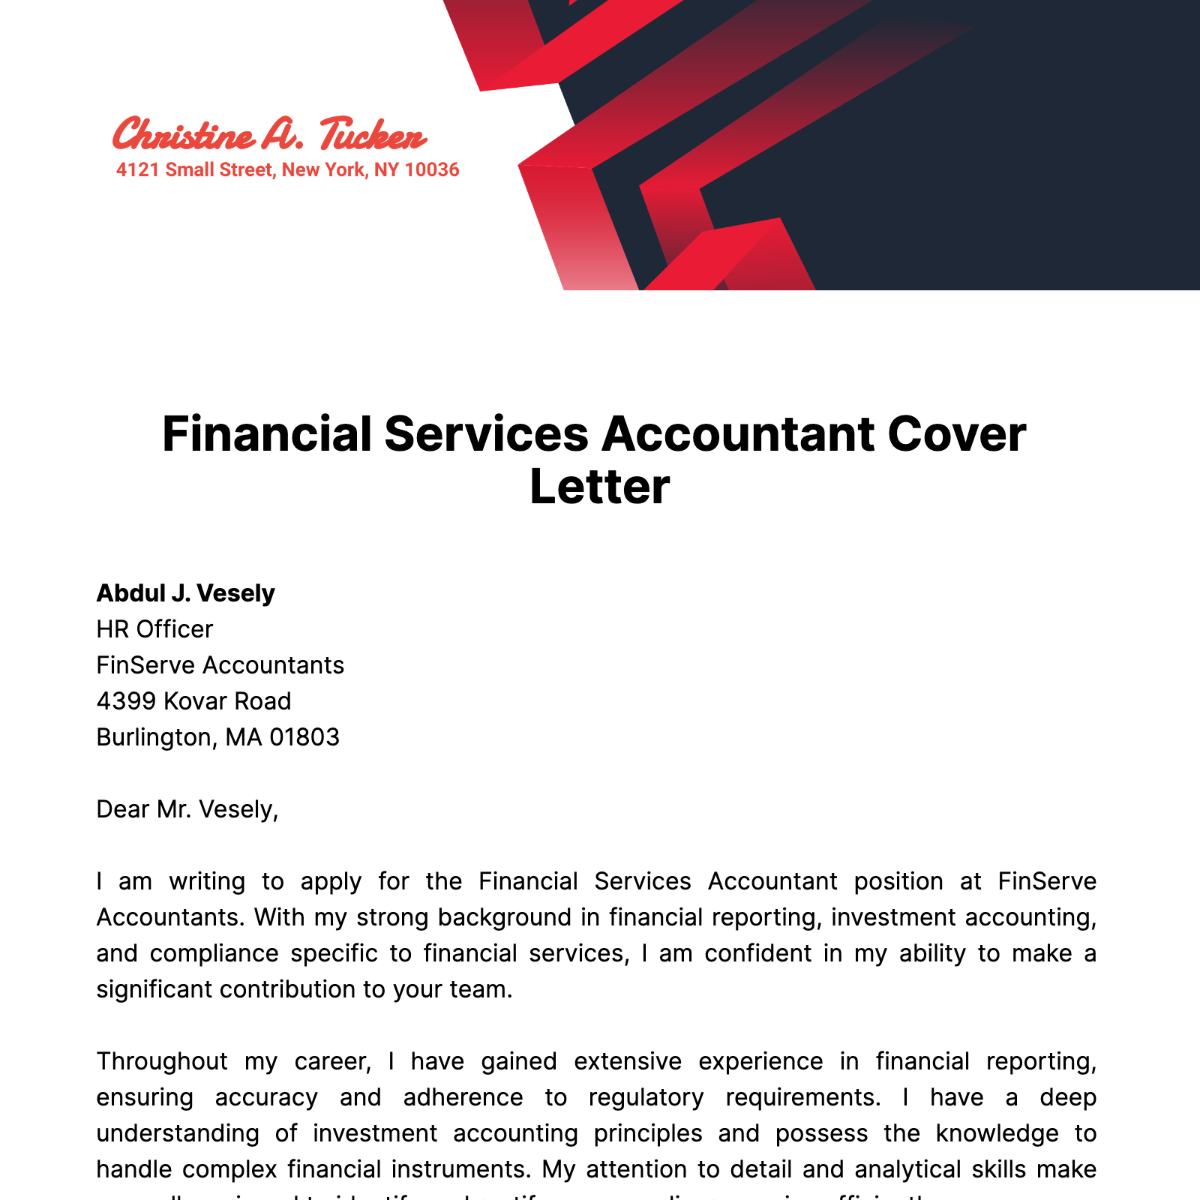 Financial Services Accountant Cover Letter Template